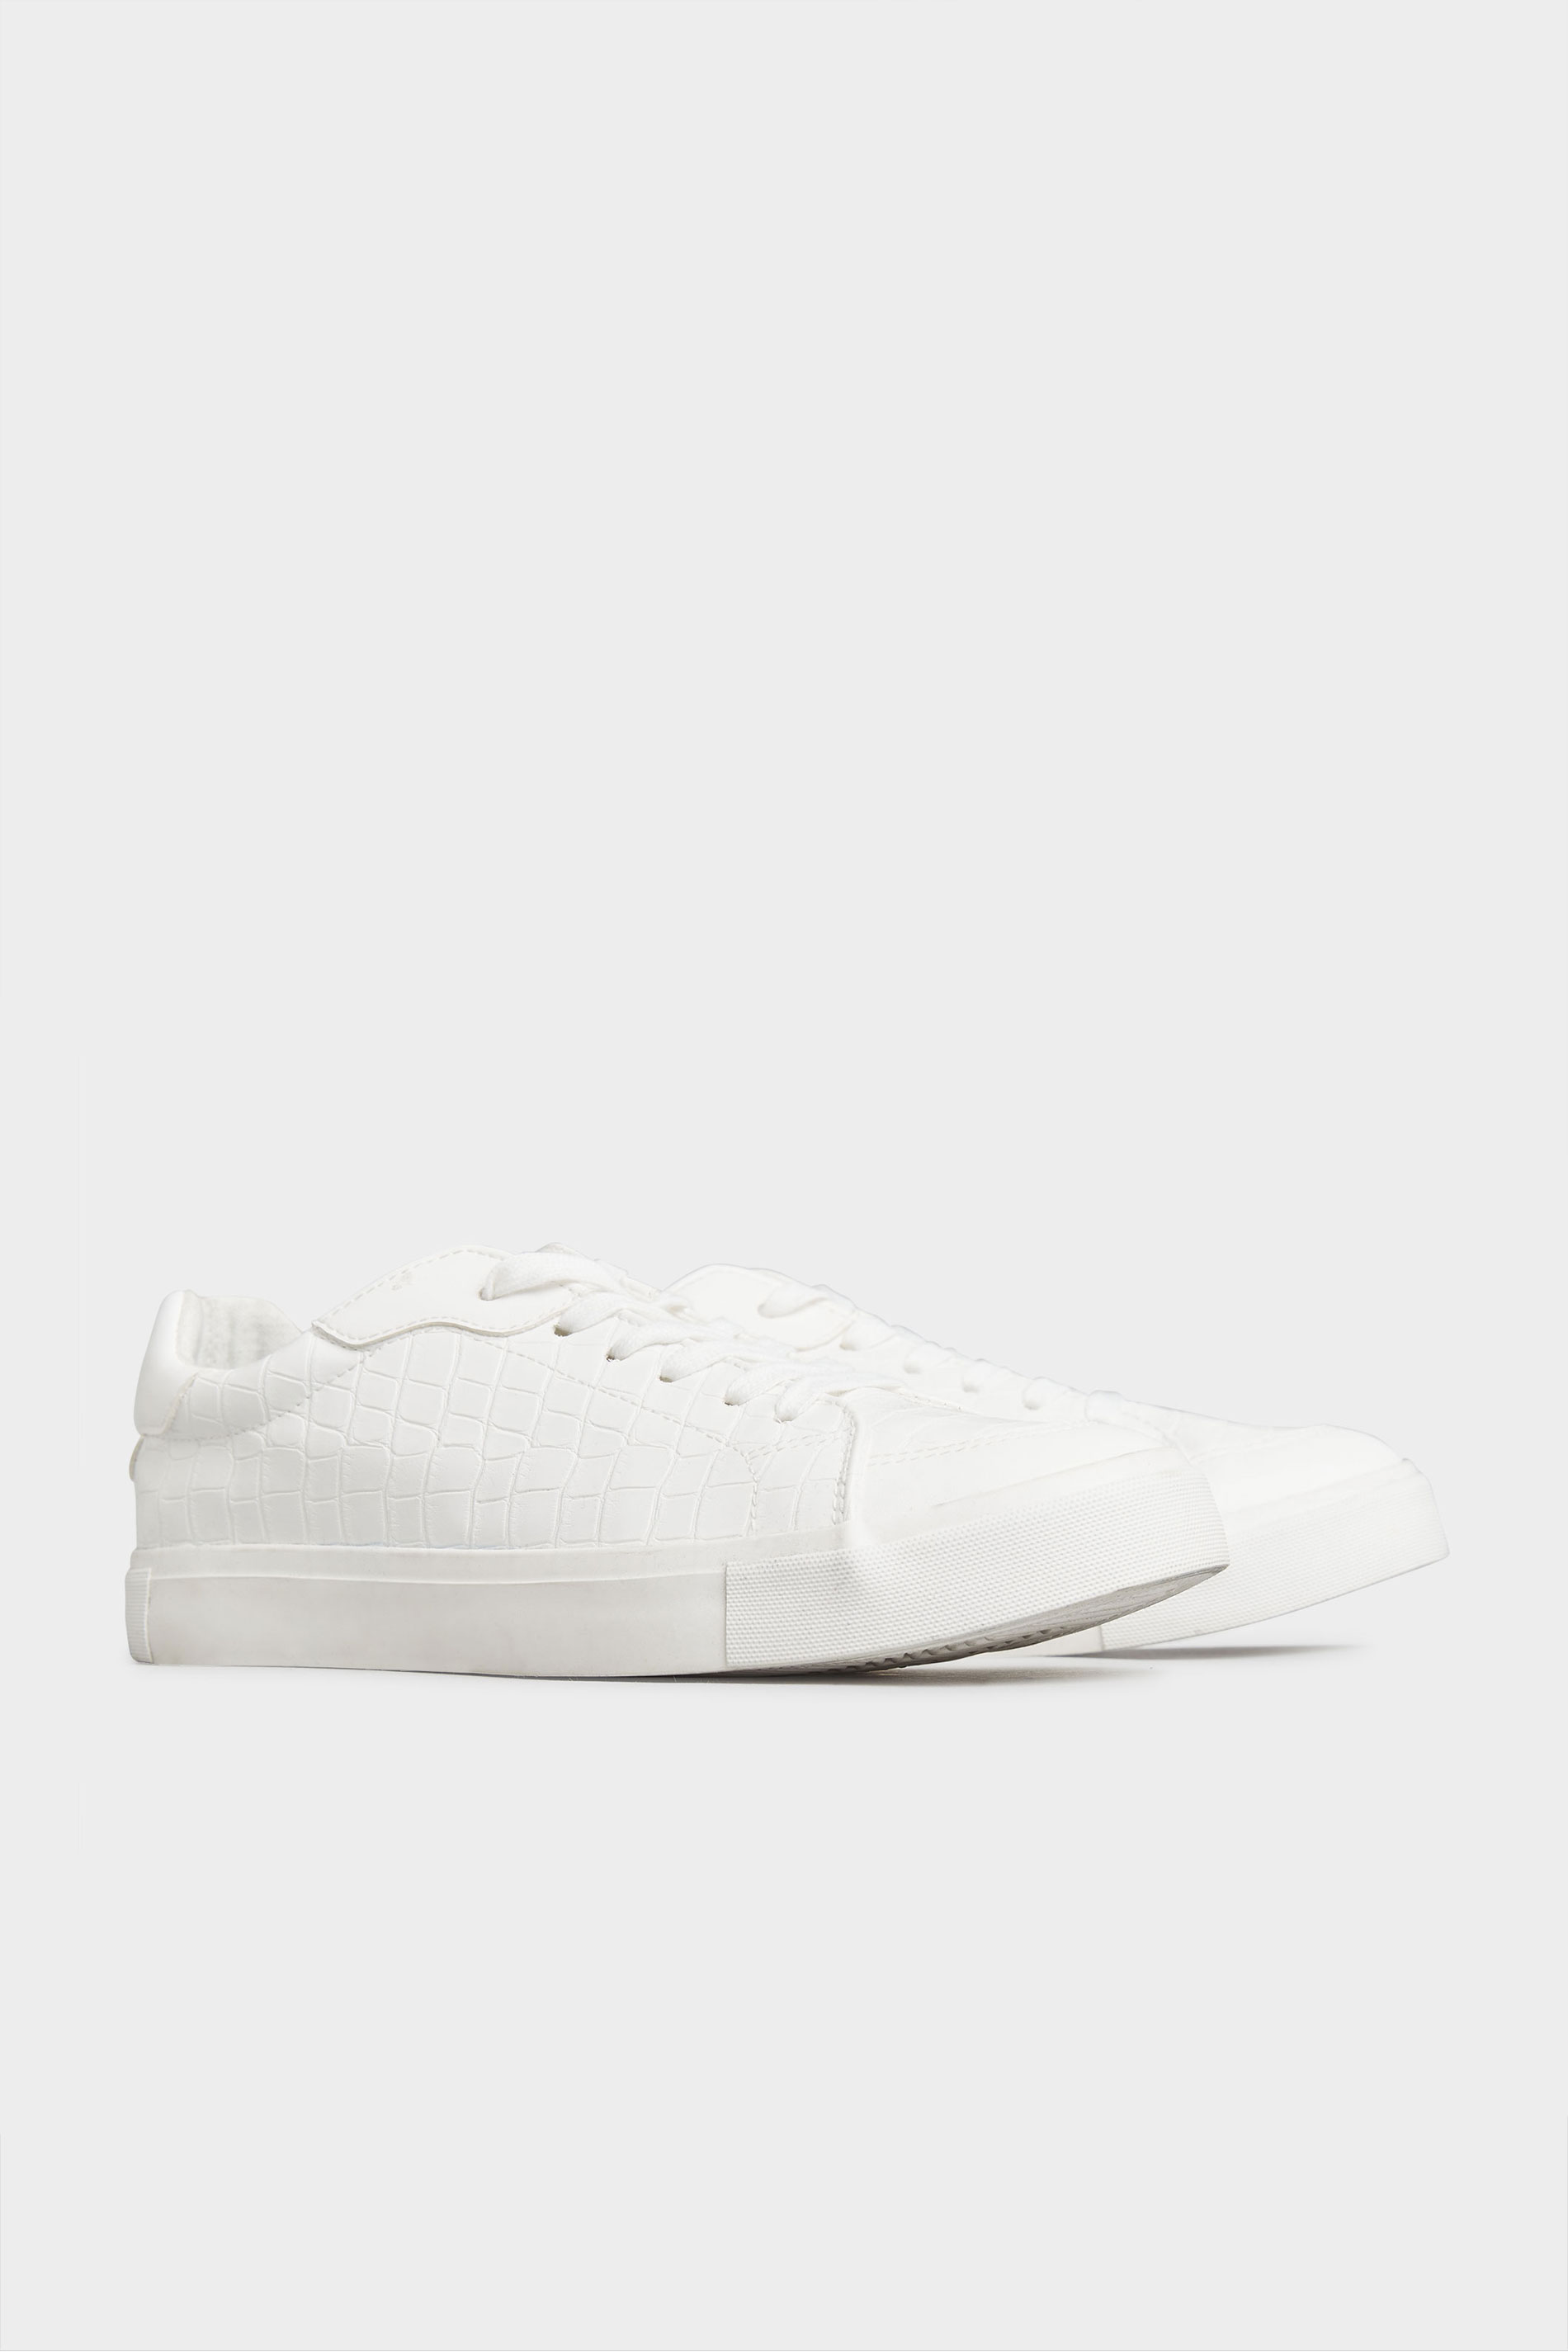 LTS White Croc Lace Up Trainers 1